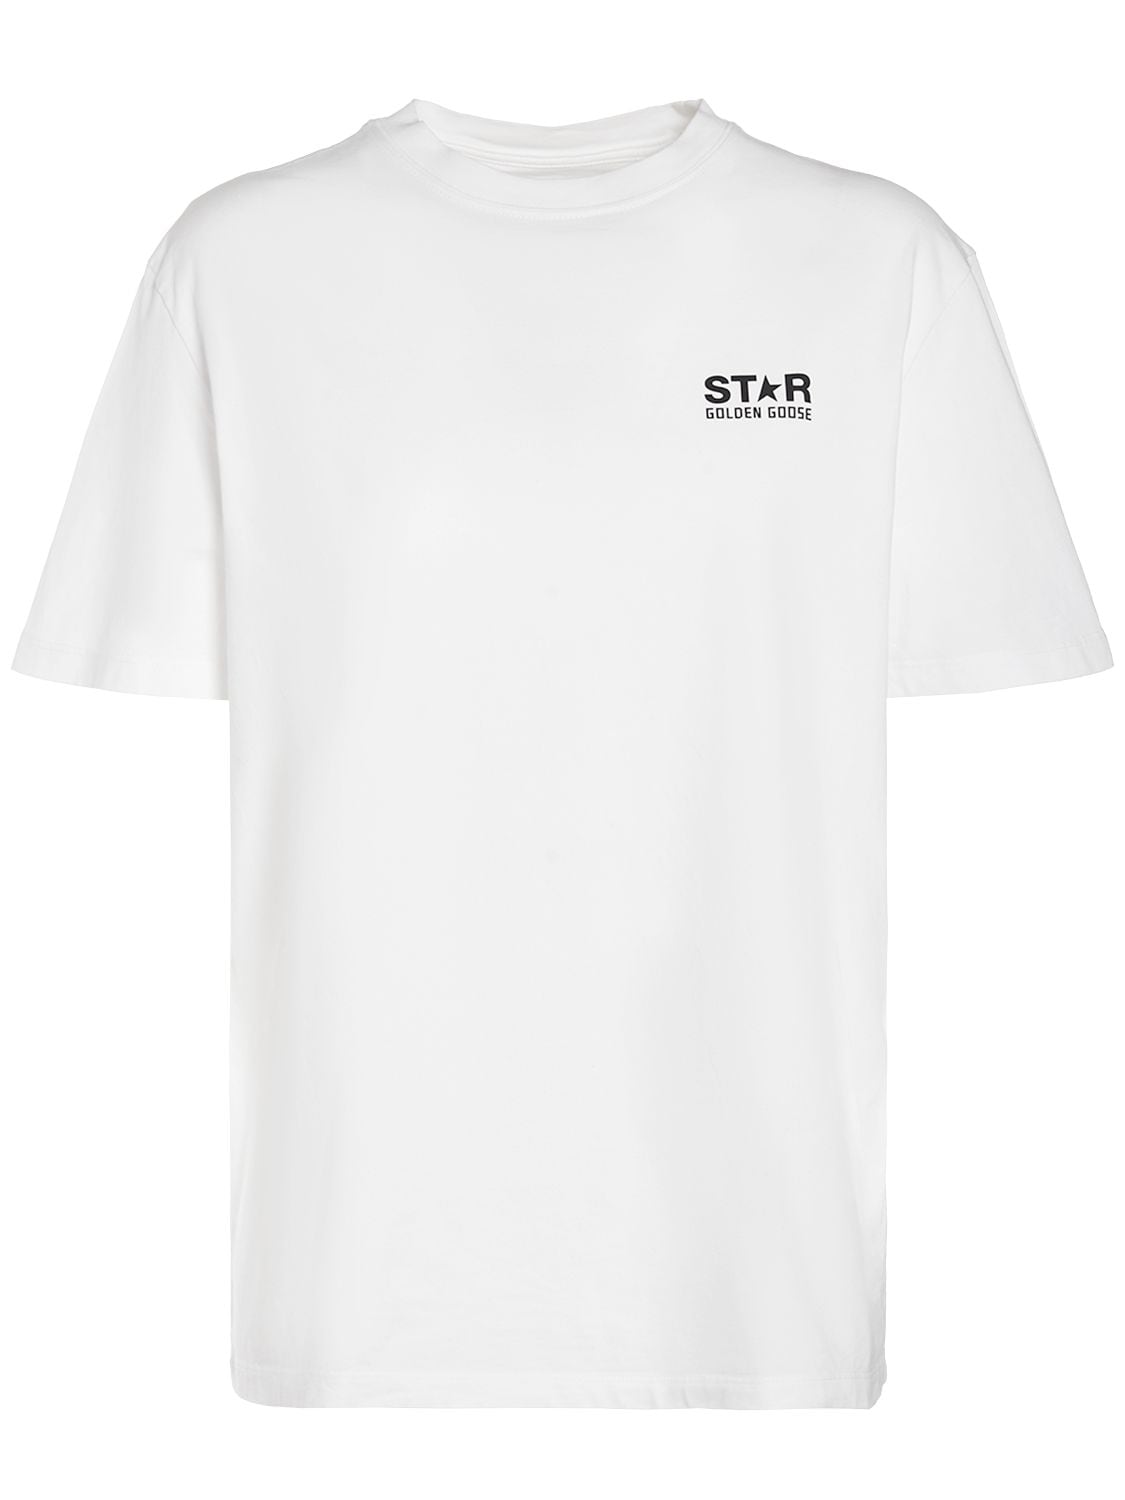 Golden Goose Star Cotton Jersey T-shirt In White